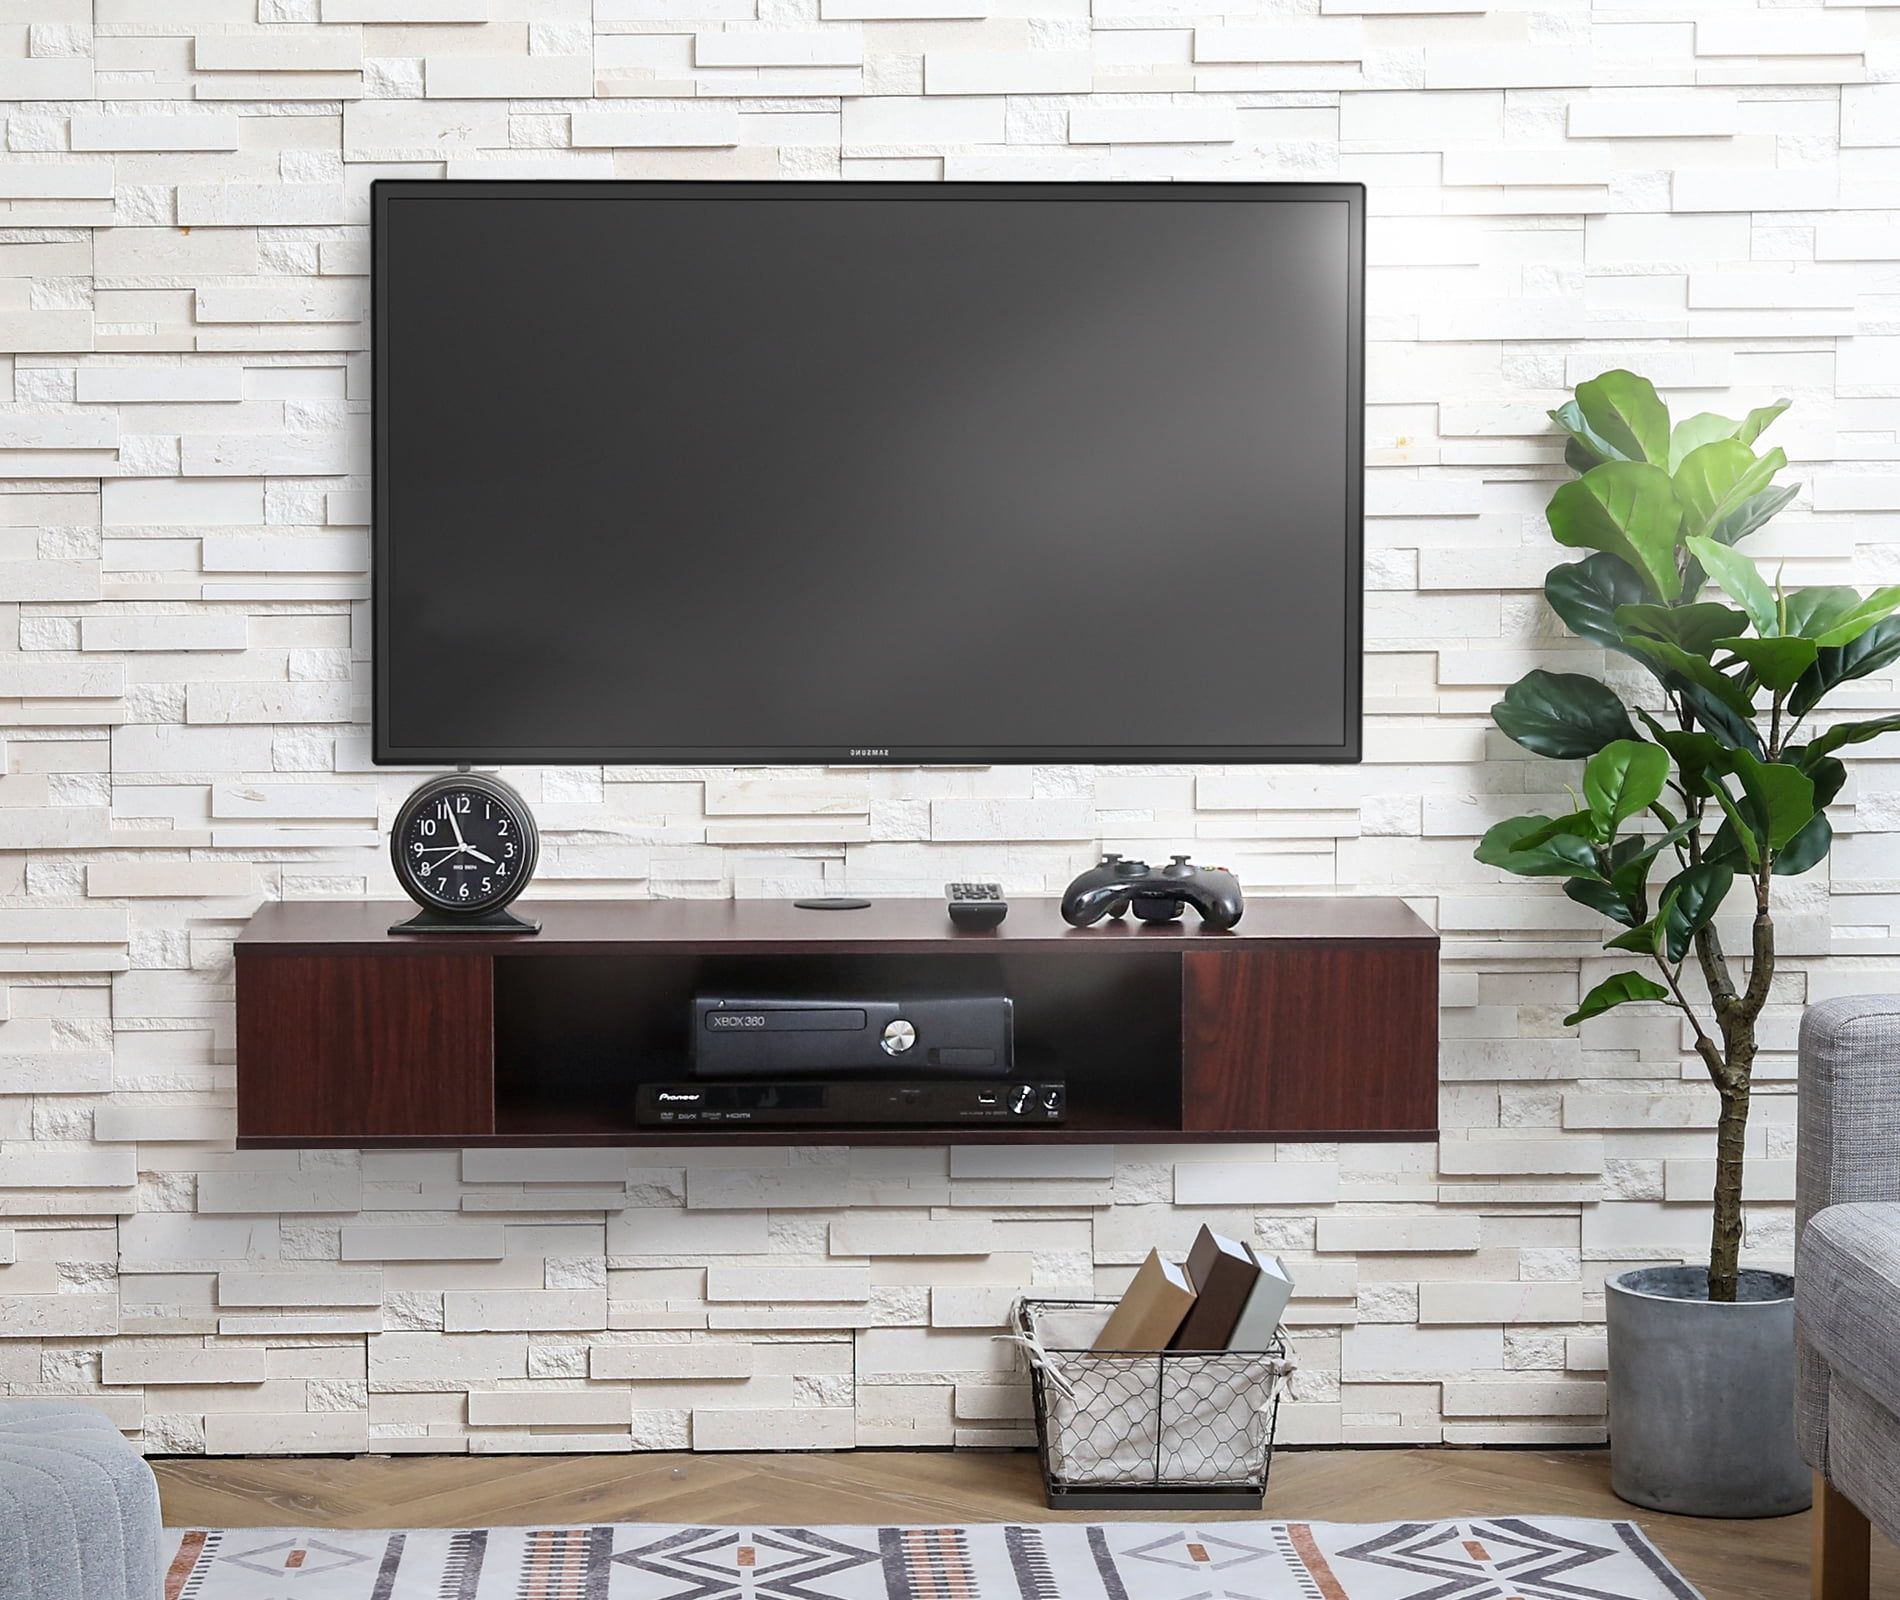 Fitueyes Wall Mounted Media Console,floating Tv Stand Component Shelf Intended For Top Shelf Mount Tv Stands (View 11 of 20)